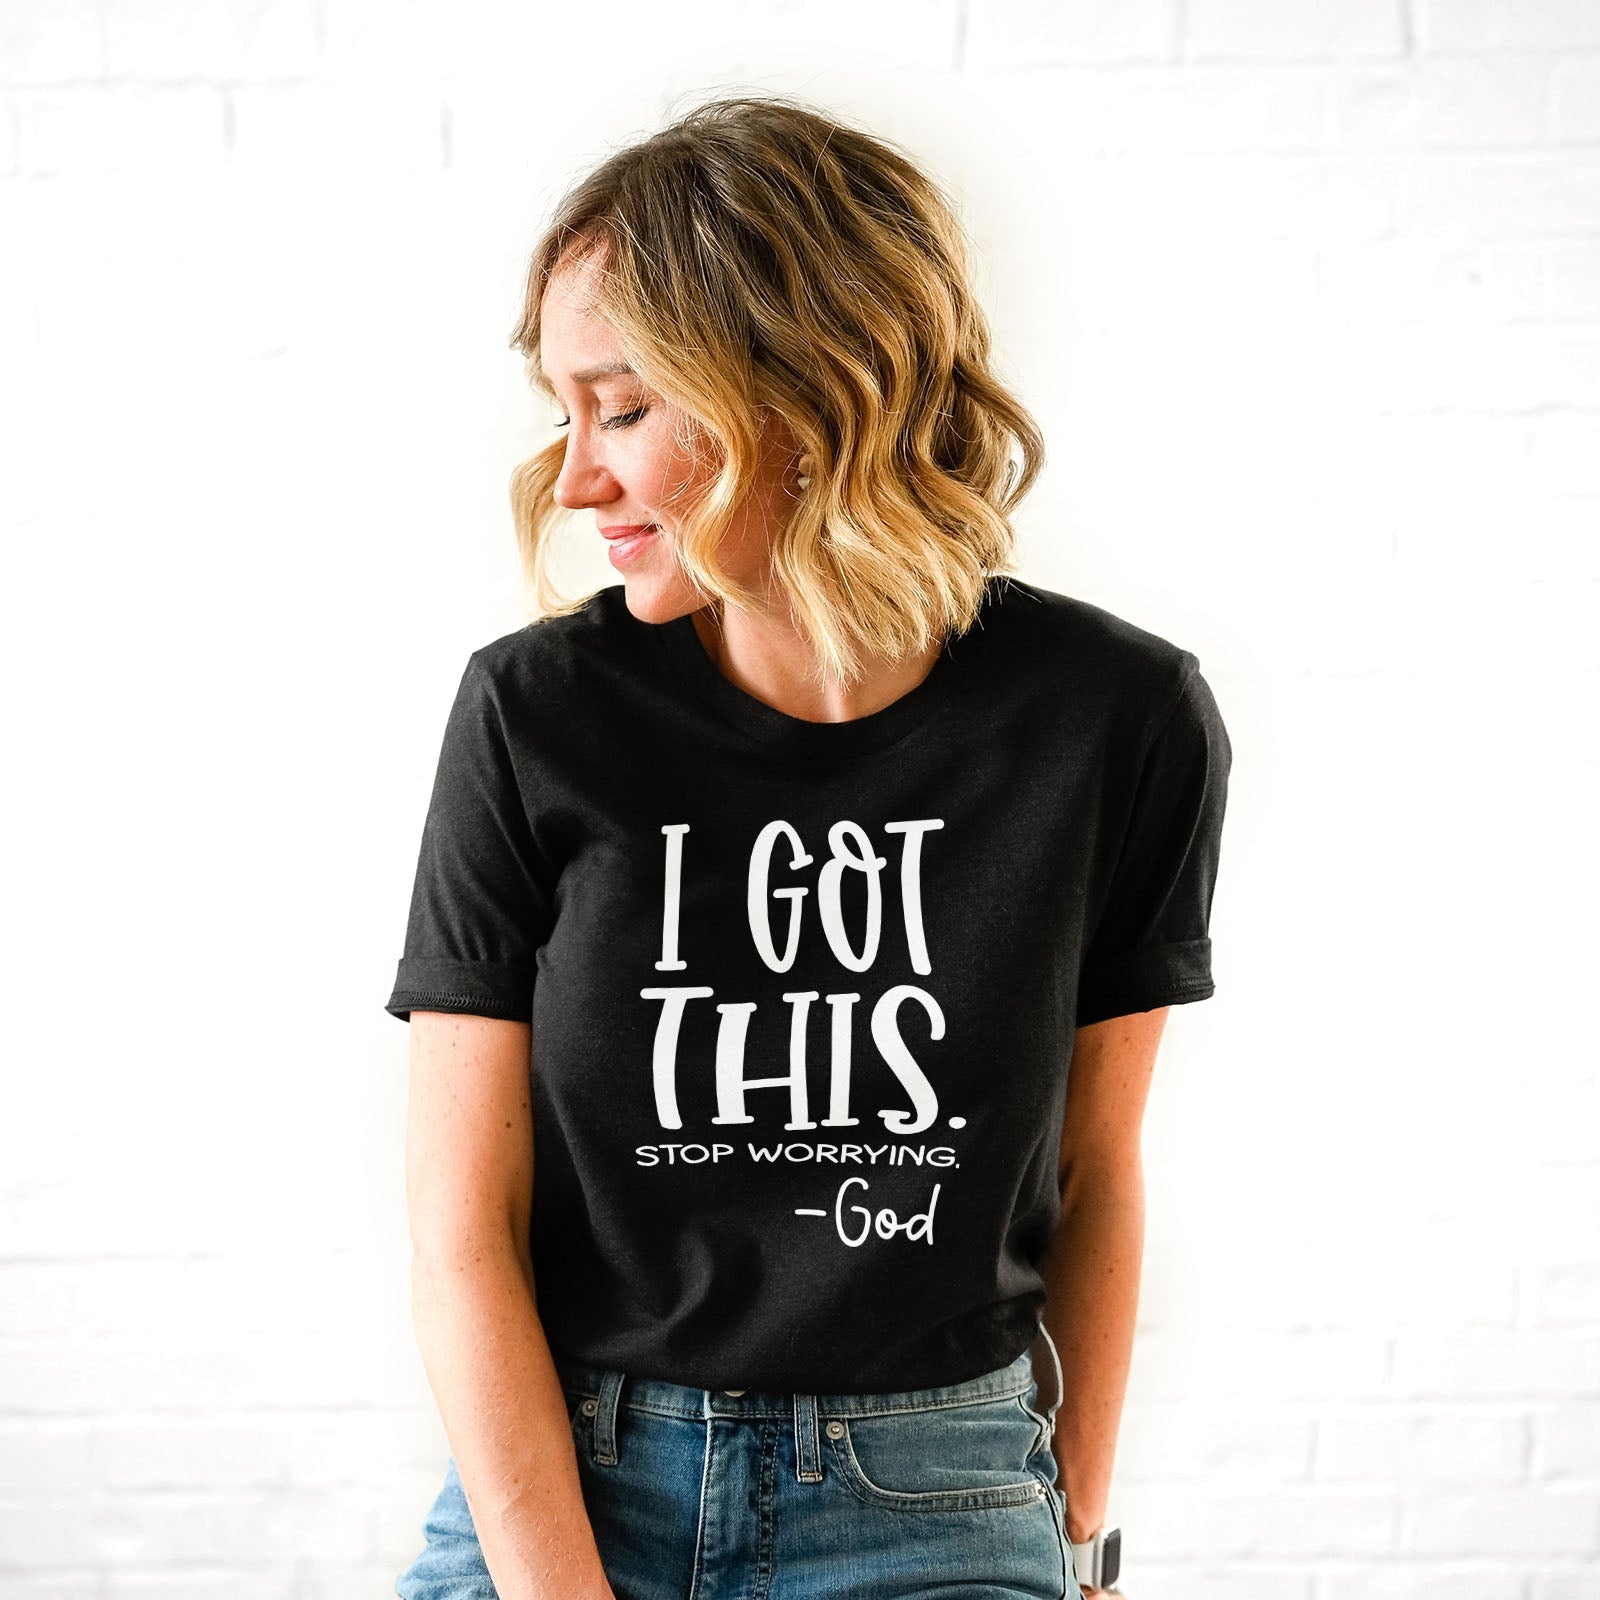 I Got This Stop Worrying Tee Shirts For Women - Christian Shirts for Women - Religious Tee Shirts